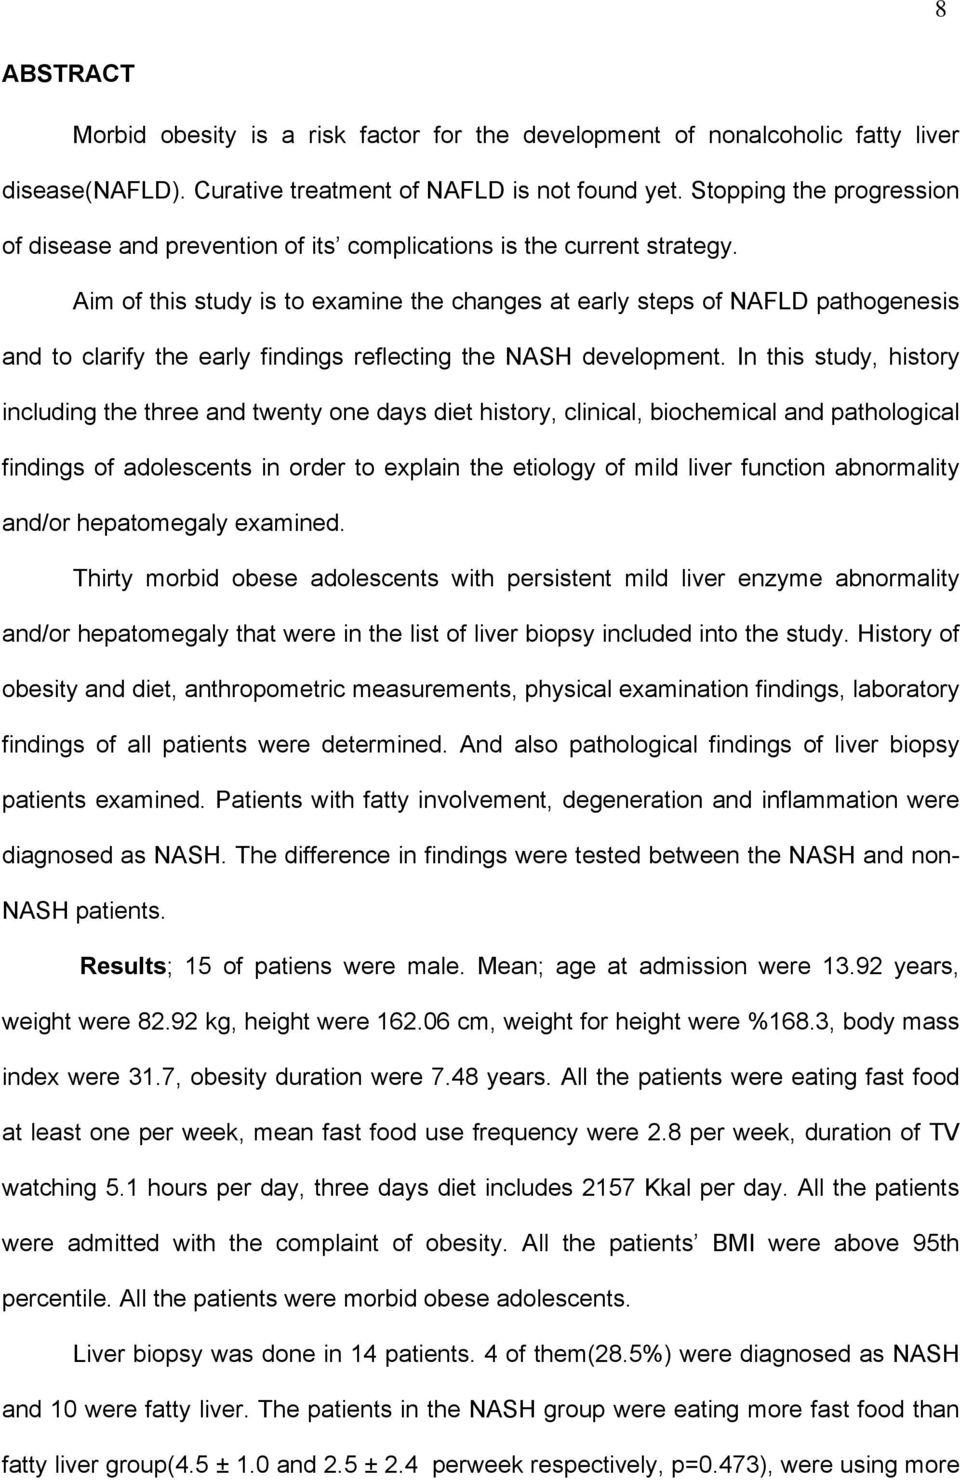 Aim of this study is to examine the changes at early steps of NAFLD pathogenesis and to clarify the early findings reflecting the NASH development.